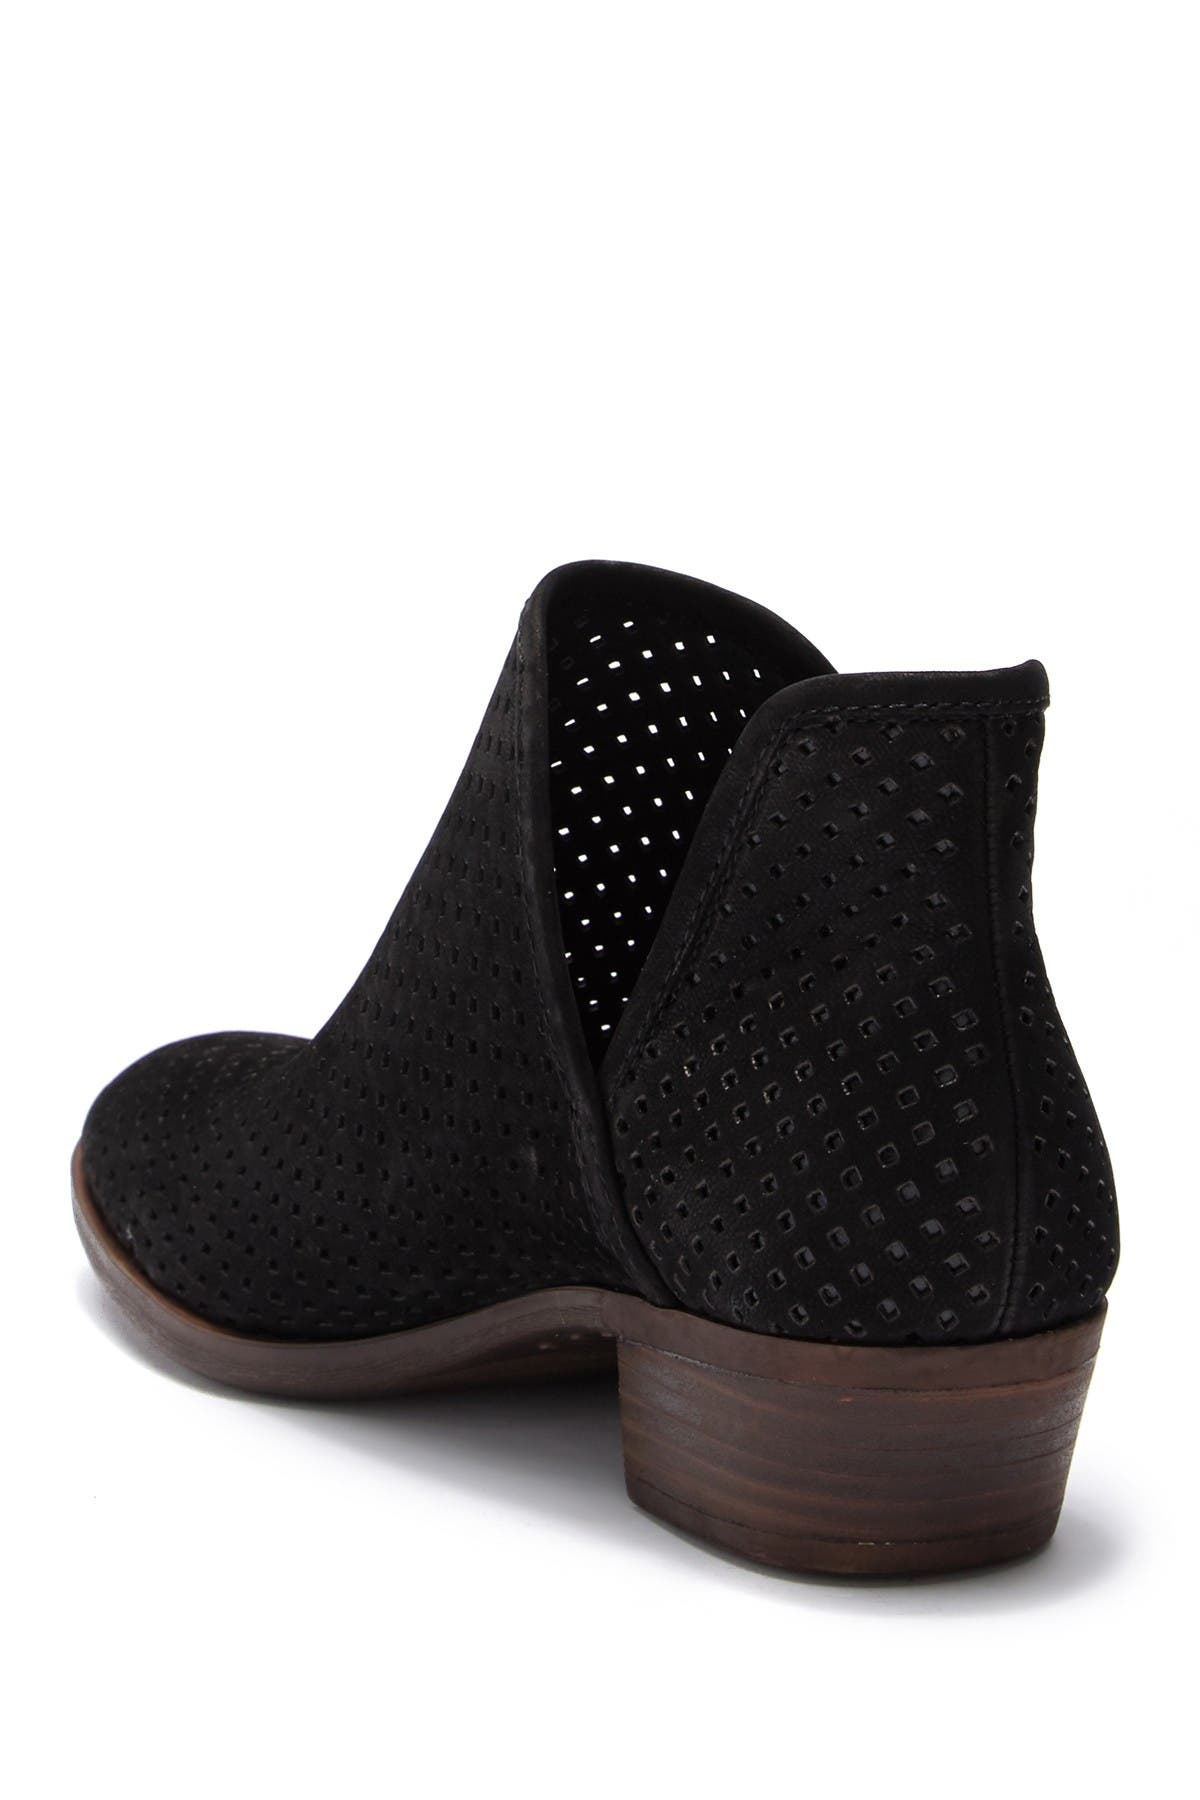 brooklin perforated suede bootie